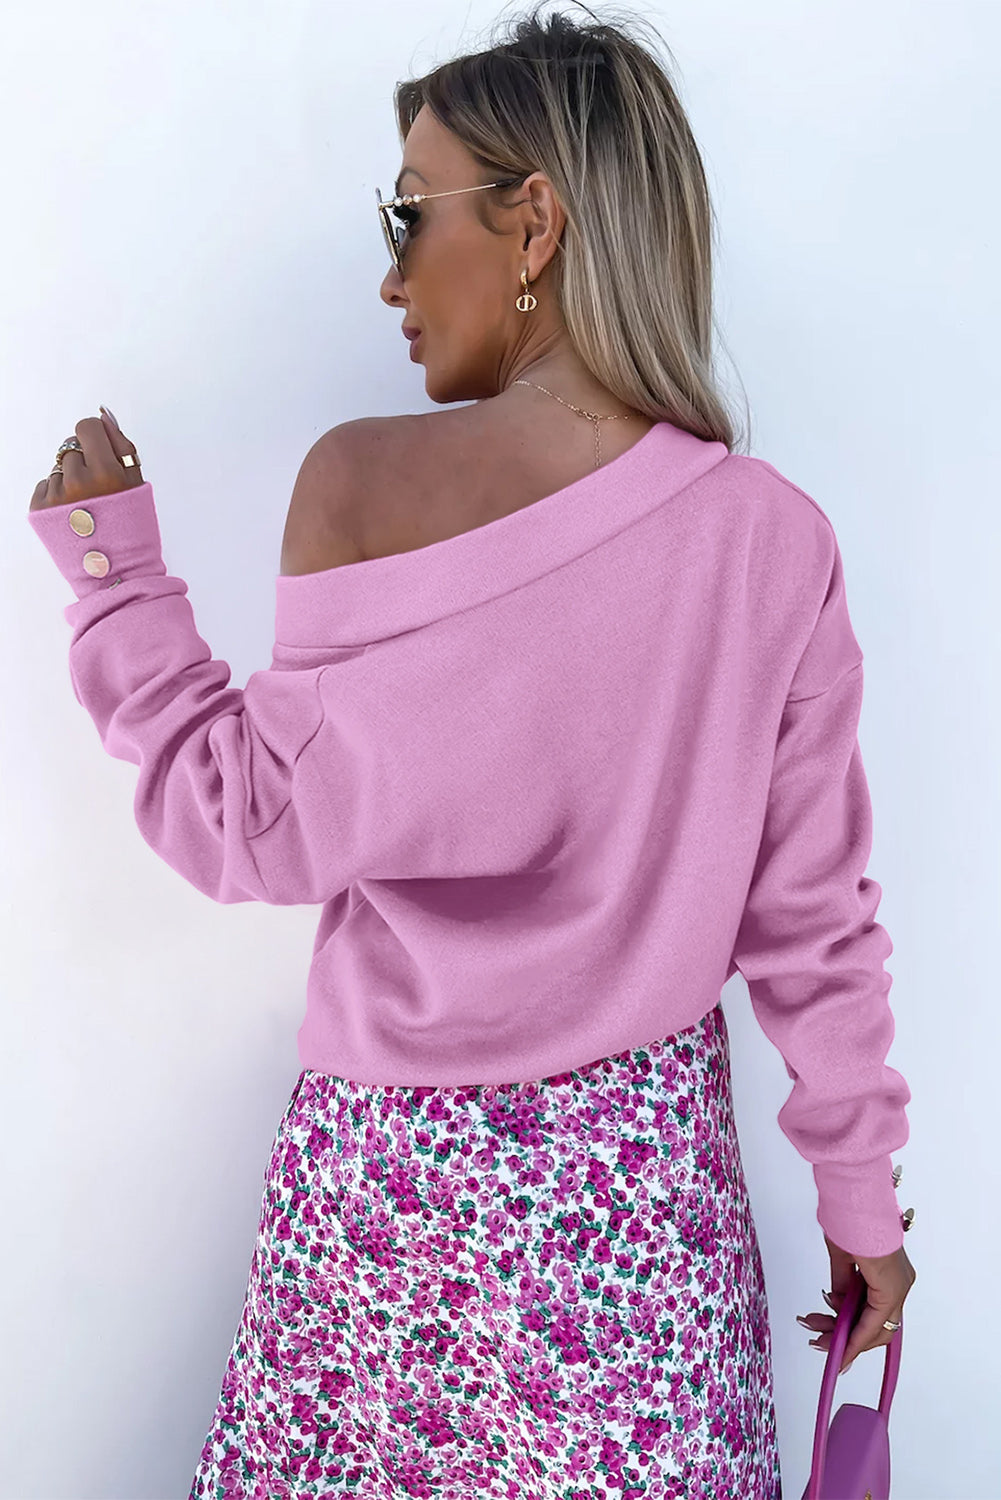 3 Colors - Light Orchid / White / Black -  Knitted V Neck Buttoned Cuffs Sweater - Sizes S-2XL Ti Amo I love you